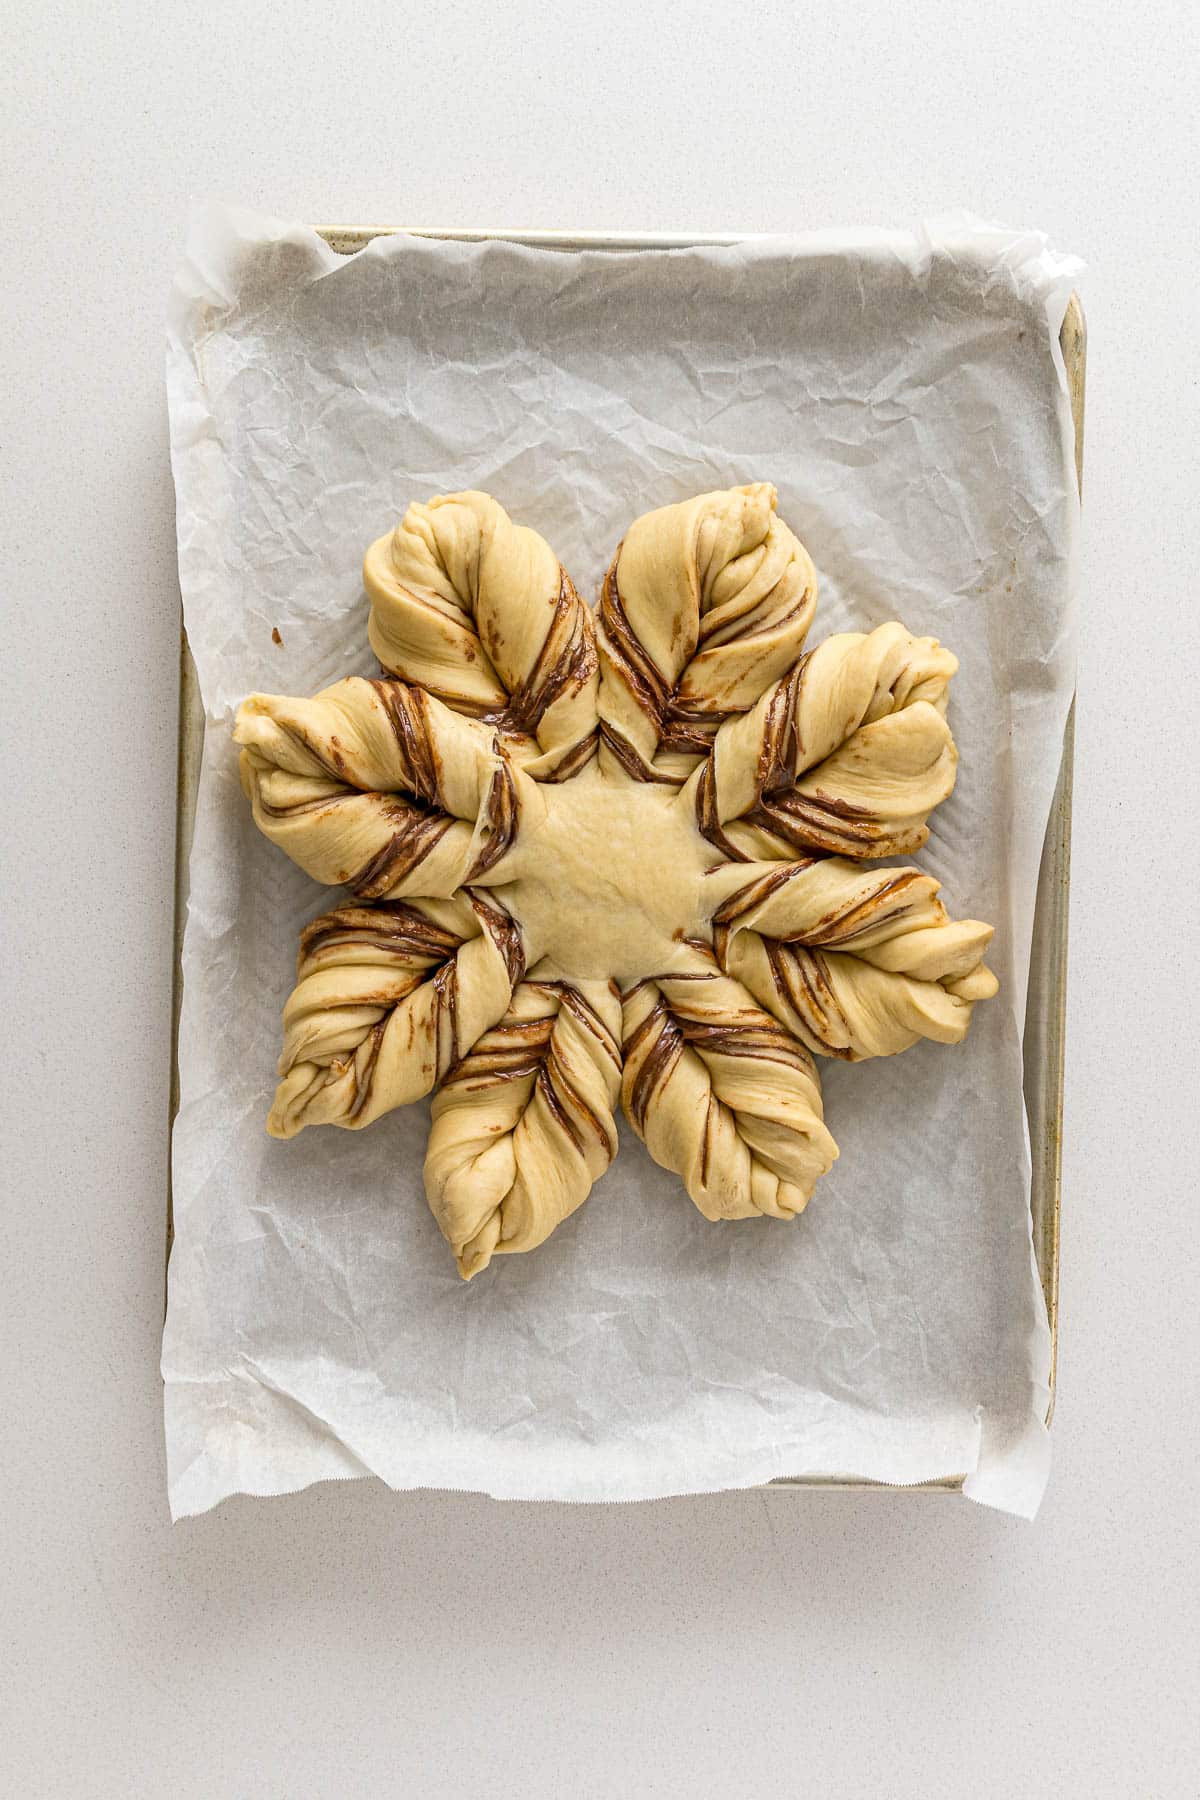 Nutella bread twisted to create the arms of the star.